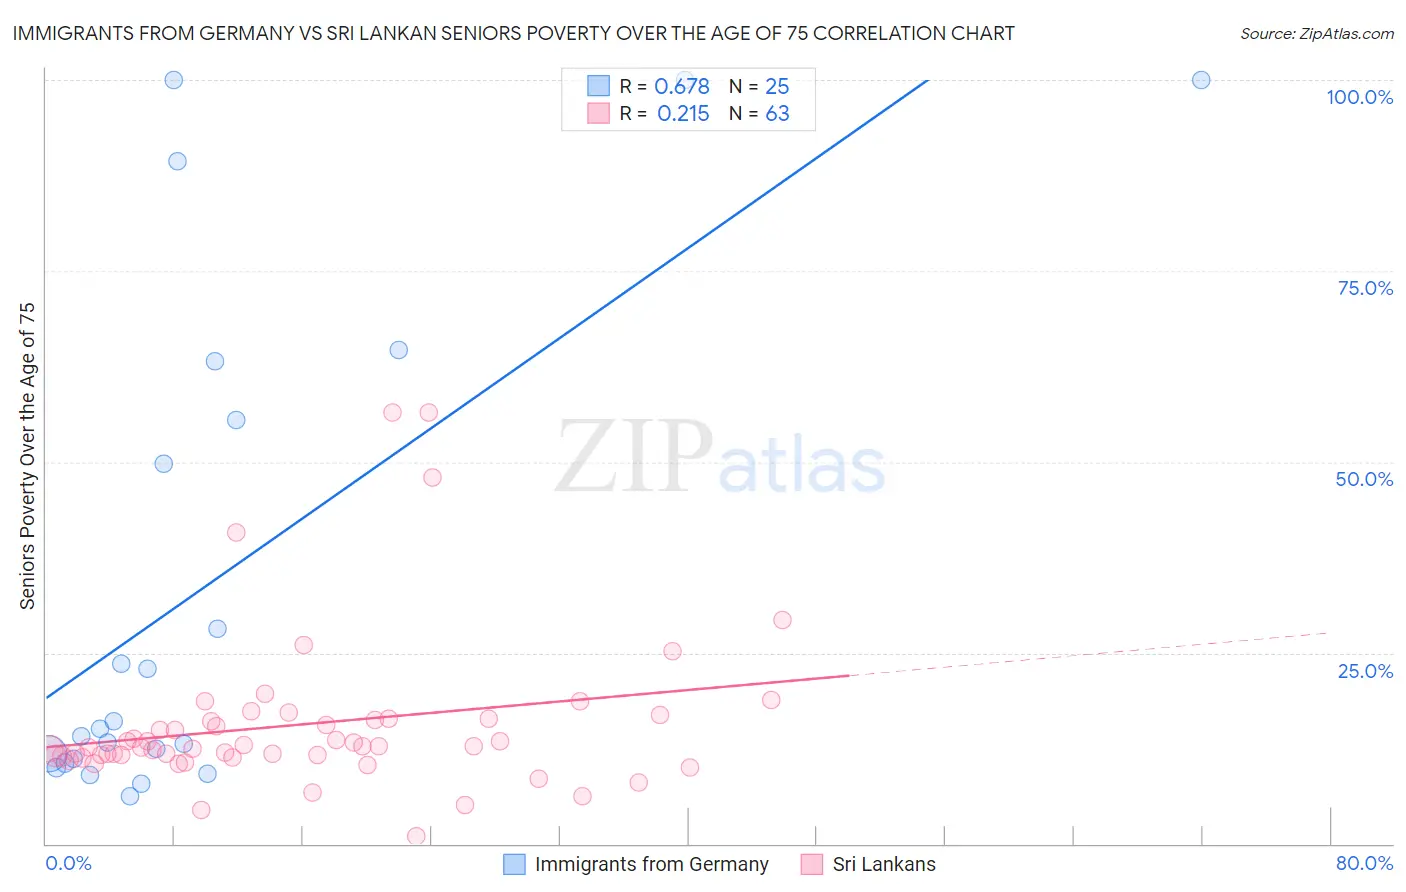 Immigrants from Germany vs Sri Lankan Seniors Poverty Over the Age of 75